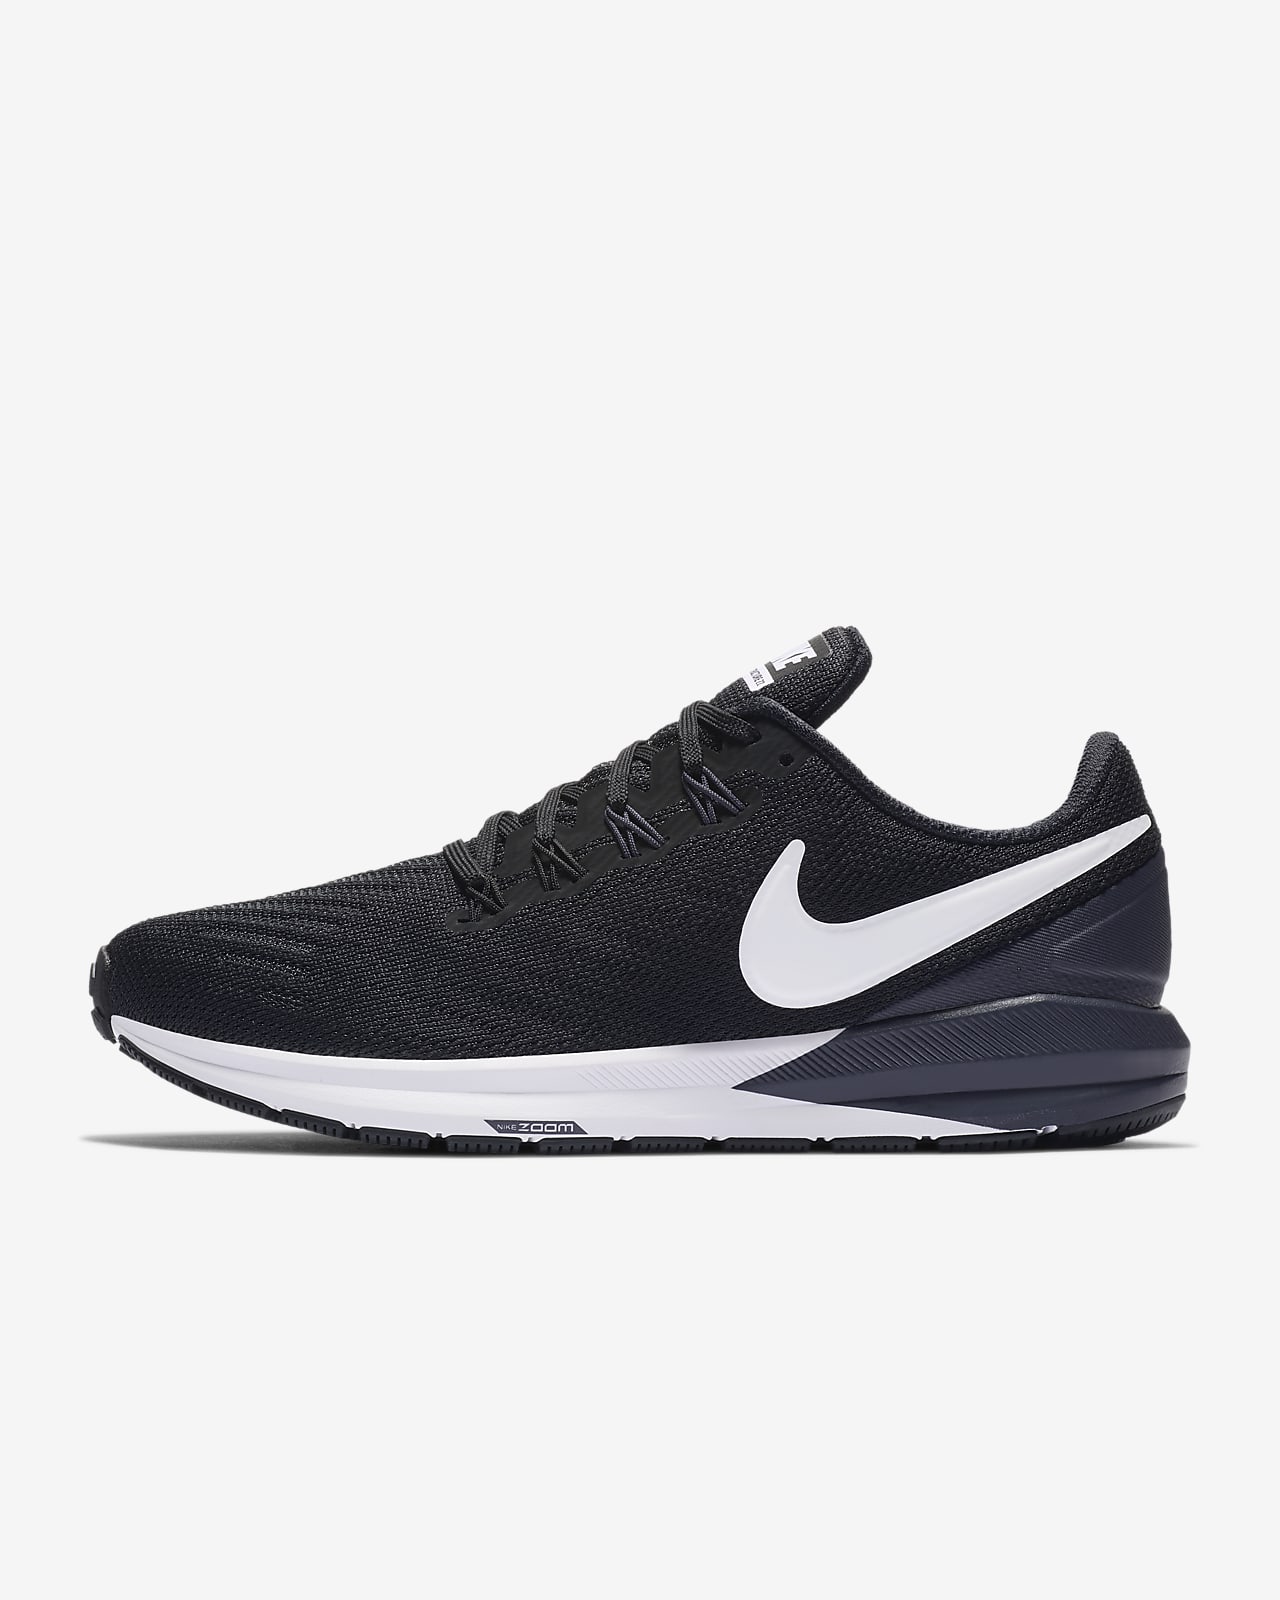 womens nike running shoes with good arch support